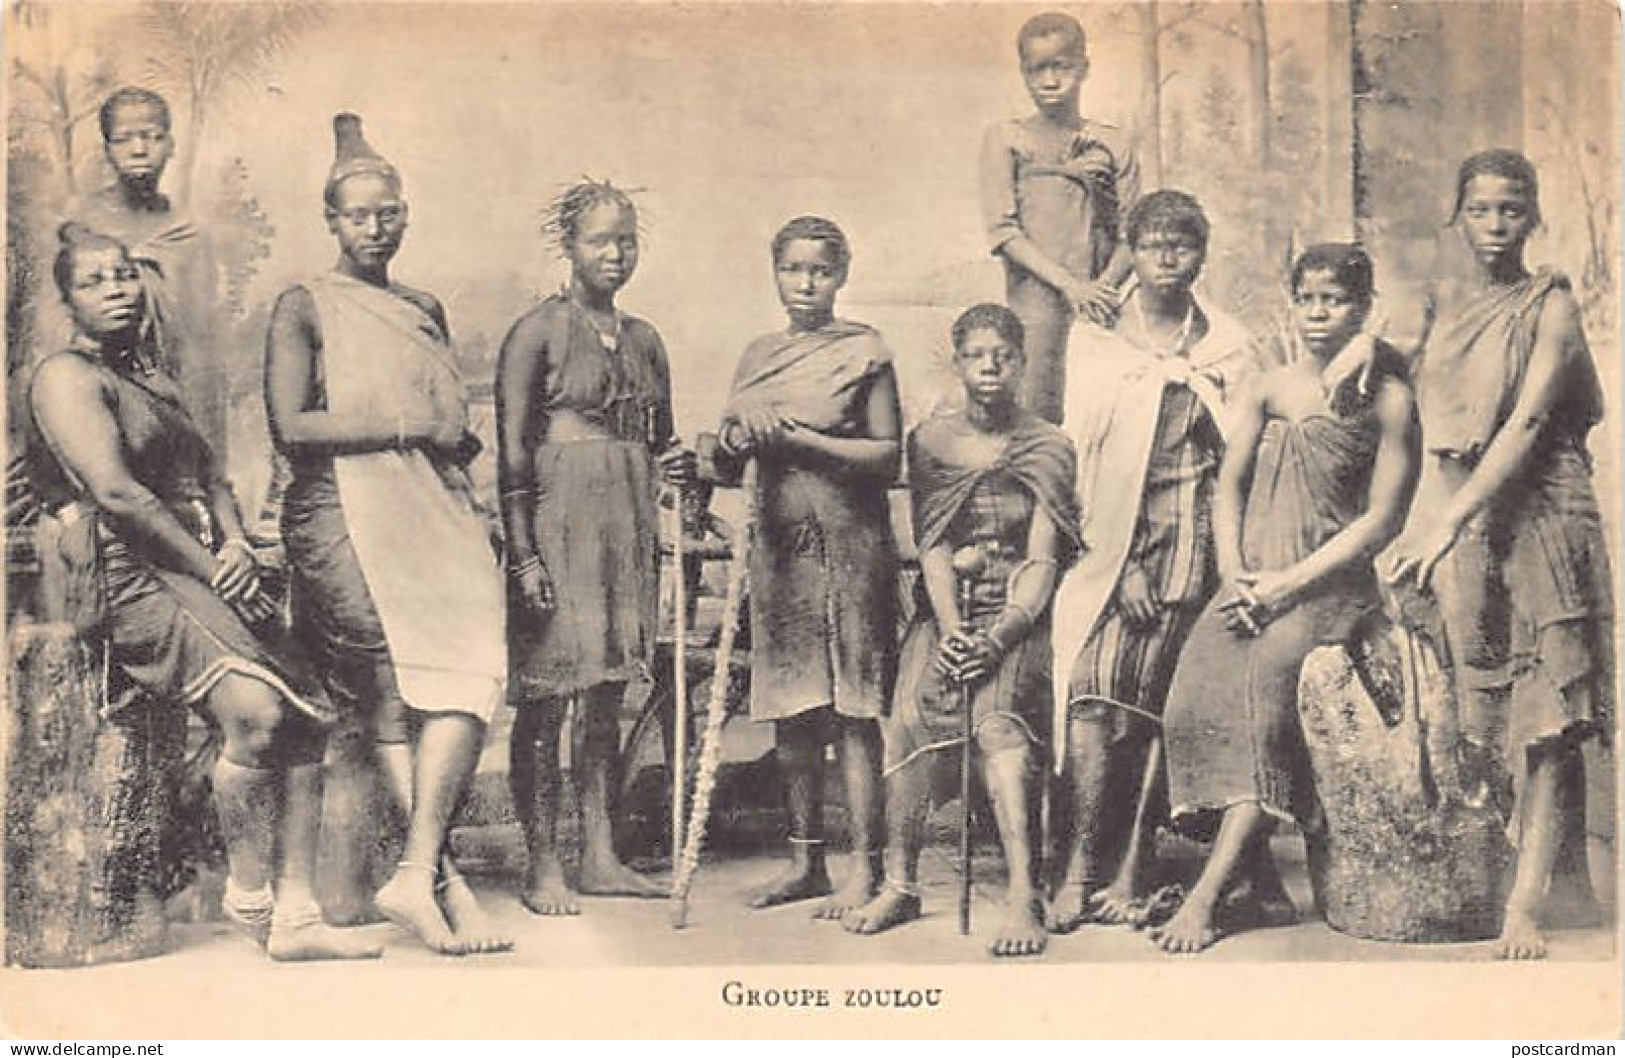 South Africa - Zulu Group - Publ. Unknown  - Zuid-Afrika